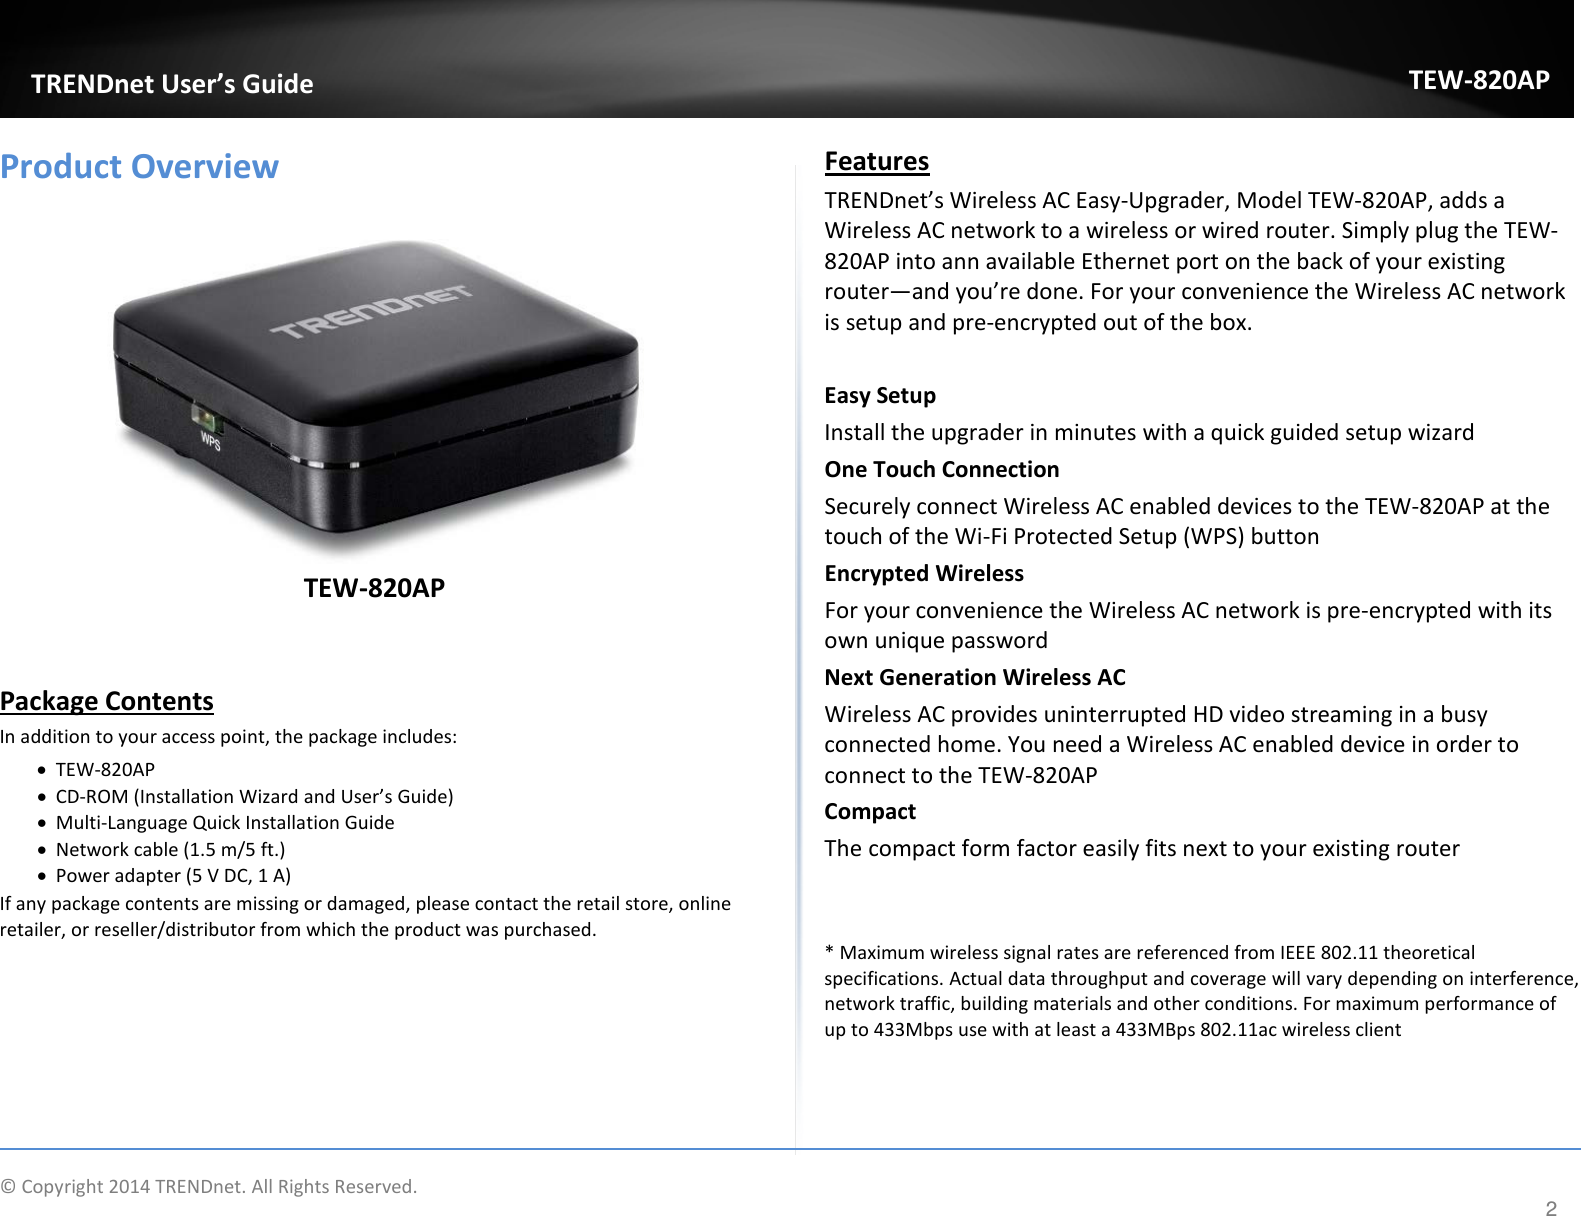             TRENDnet User’s Guide TEW-820AP Product Overview   TEW-820AP   Package Contents In addition to your access point, the package includes: • TEW-820AP • CD-ROM (Installation Wizard and User’s Guide) • Multi-Language Quick Installation Guide • Network cable (1.5 m/5 ft.) • Power adapter (5 V DC, 1 A) If any package contents are missing or damaged, please contact the retail store, online retailer, or reseller/distributor from which the product was purchased. Features  TRENDnet’s Wireless AC Easy-Upgrader, Model TEW-820AP, adds a Wireless AC network to a wireless or wired router. Simply plug the TEW-820AP into ann available Ethernet port on the back of your existing router—and you’re done. For your convenience the Wireless AC network is setup and pre-encrypted out of the box.  Easy Setup Install the upgrader in minutes with a quick guided setup wizard One Touch Connection Securely connect Wireless AC enabled devices to the TEW-820AP at the touch of the Wi-Fi Protected Setup (WPS) button Encrypted Wireless For your convenience the Wireless AC network is pre-encrypted with its own unique password Next Generation Wireless AC Wireless AC provides uninterrupted HD video streaming in a busy connected home. You need a Wireless AC enabled device in order to connect to the TEW-820AP  Compact The compact form factor easily fits next to your existing router      * Maximum wireless signal rates are referenced from IEEE 802.11 theoretical specifications. Actual data throughput and coverage will vary depending on interference, network traffic, building materials and other conditions. For maximum performance of up to 433Mbps use with at least a 433MBps 802.11ac wireless client  © Copyright 2014 TRENDnet. All Rights Reserved.      2 